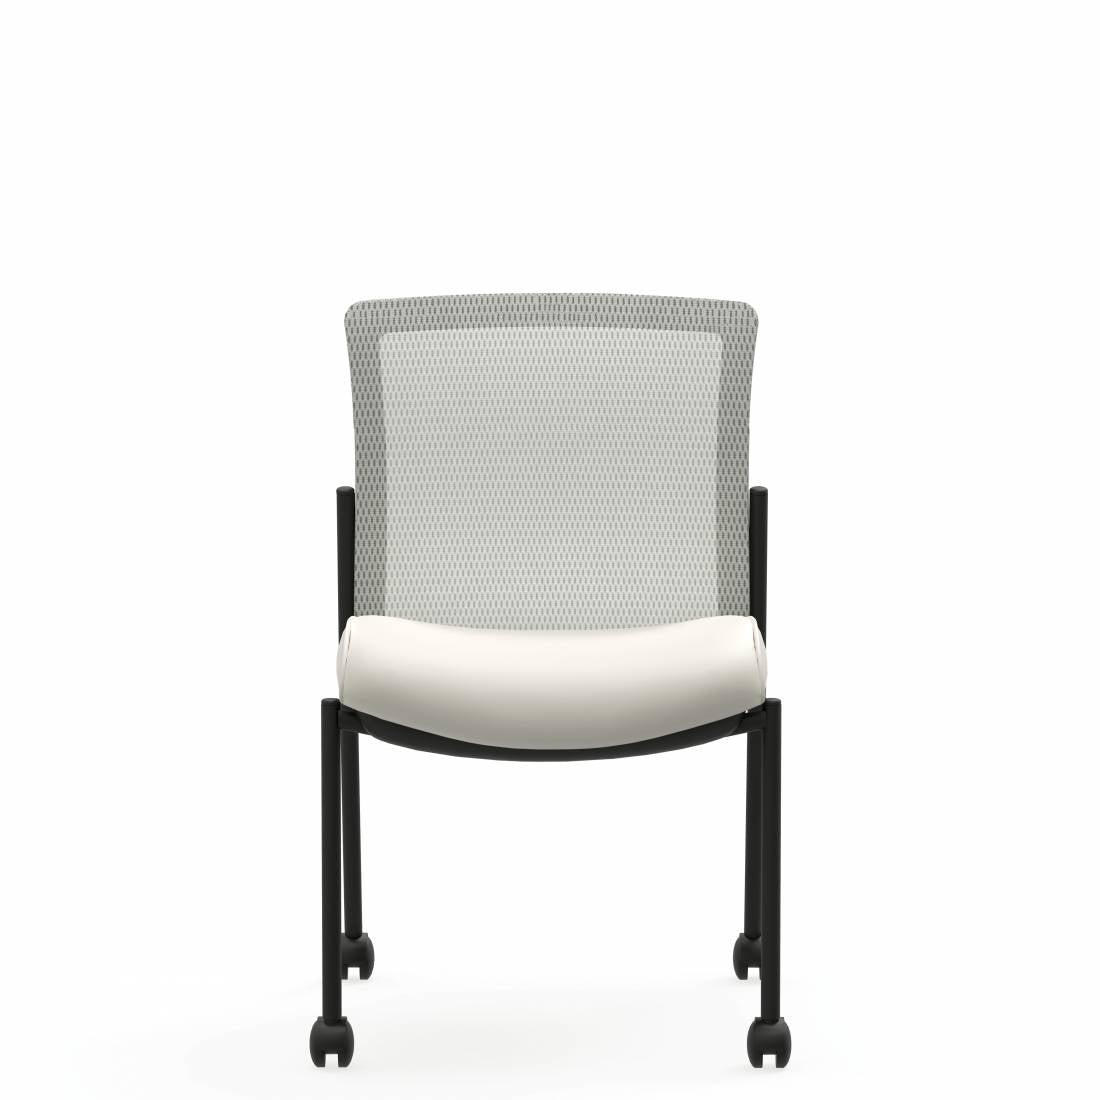 Vion Armless Mesh Back Side Chair with Casters 6324C - Fabric